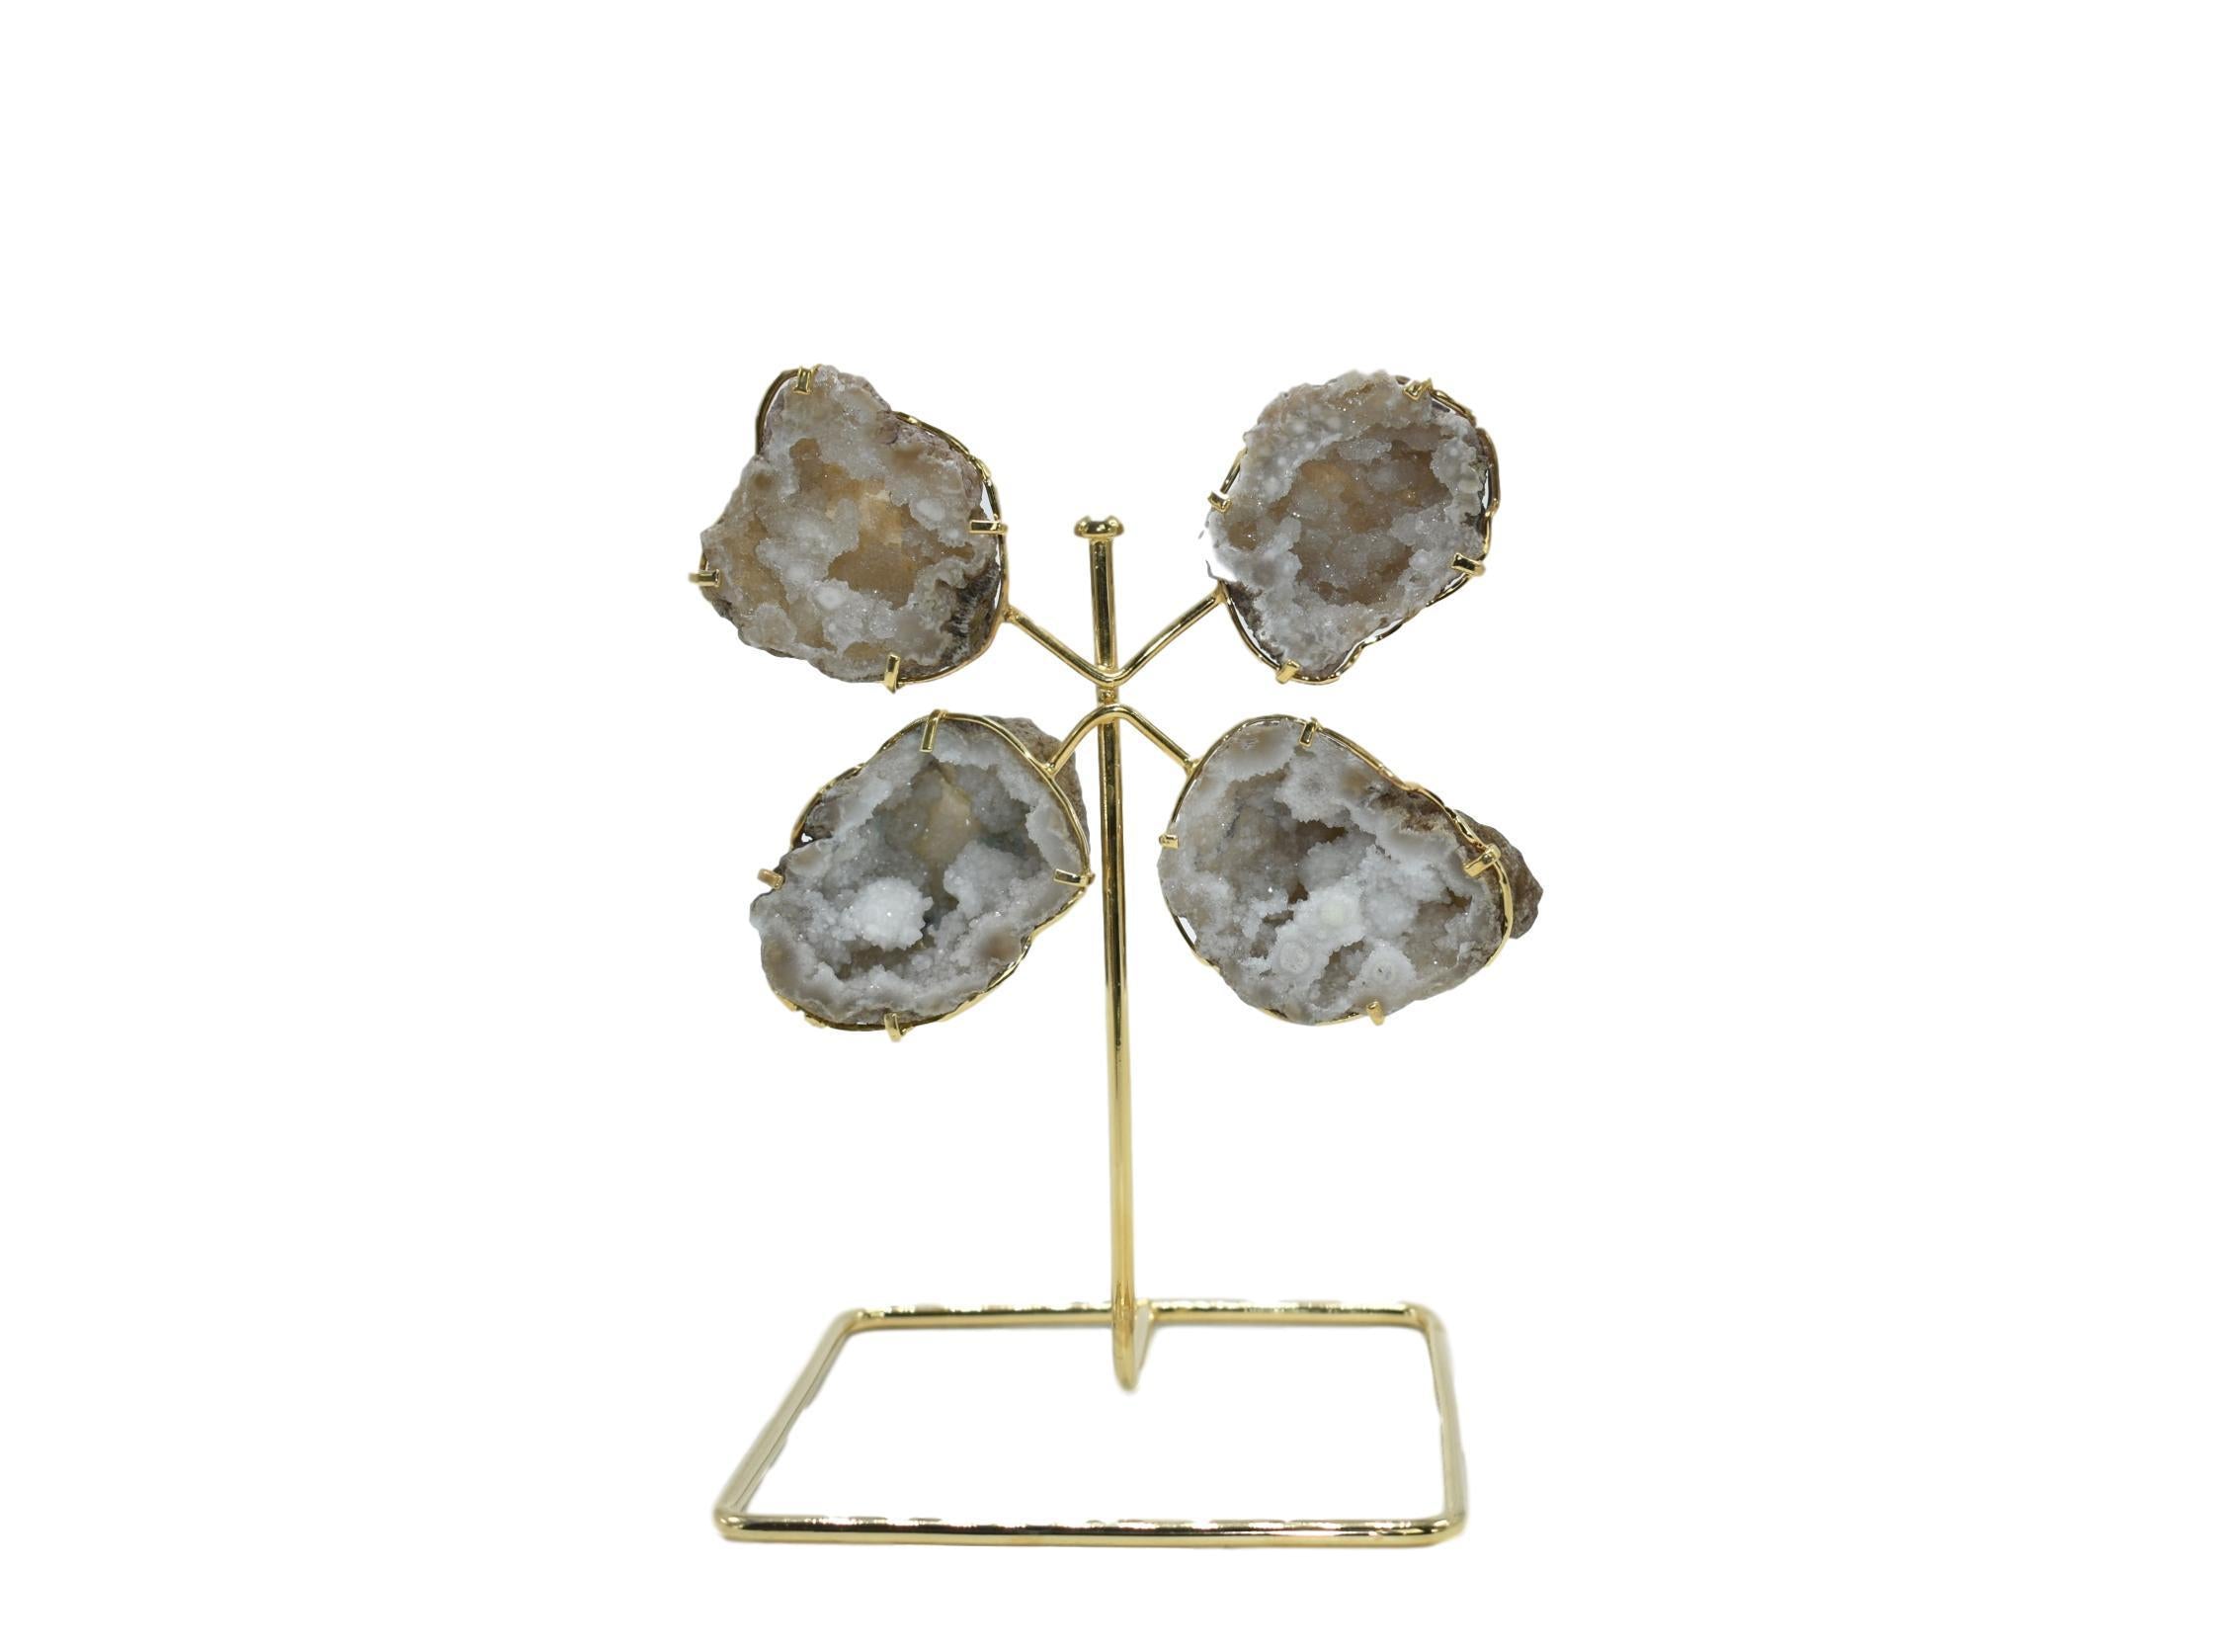 Quartz Geode From Morocco on Wire Stand